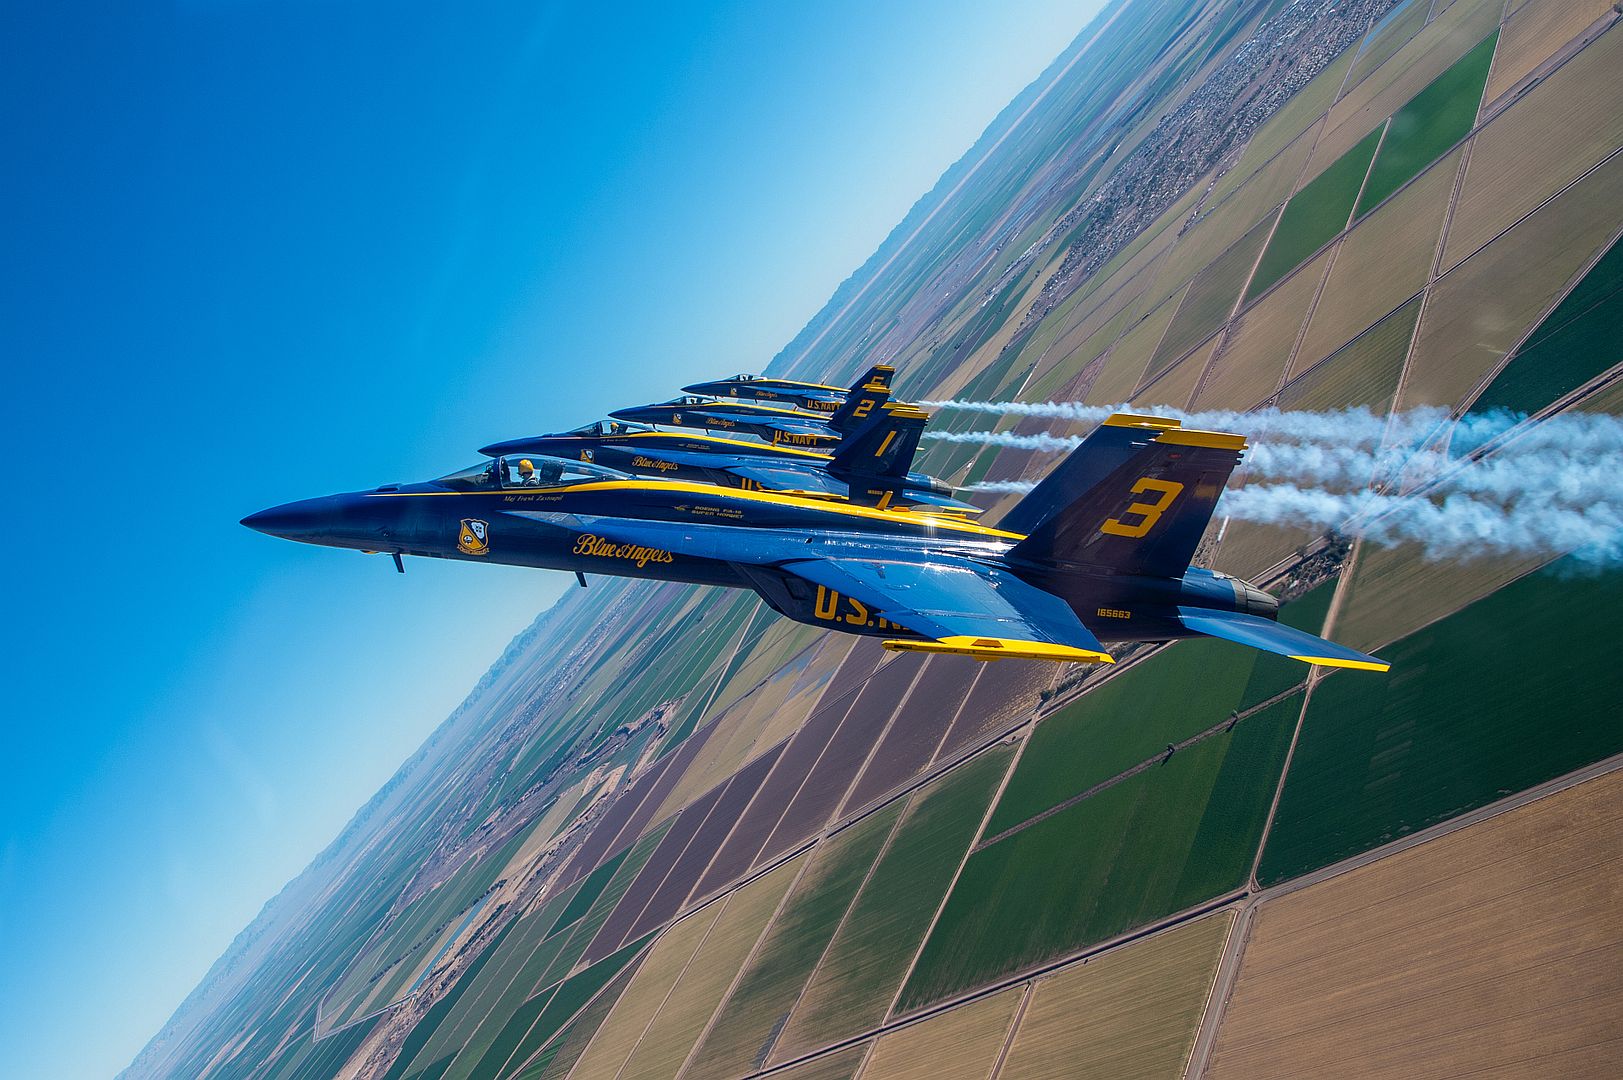  Perform The Line Abreast Loop Maneuver During A Training Flight Over Naval Air Facility